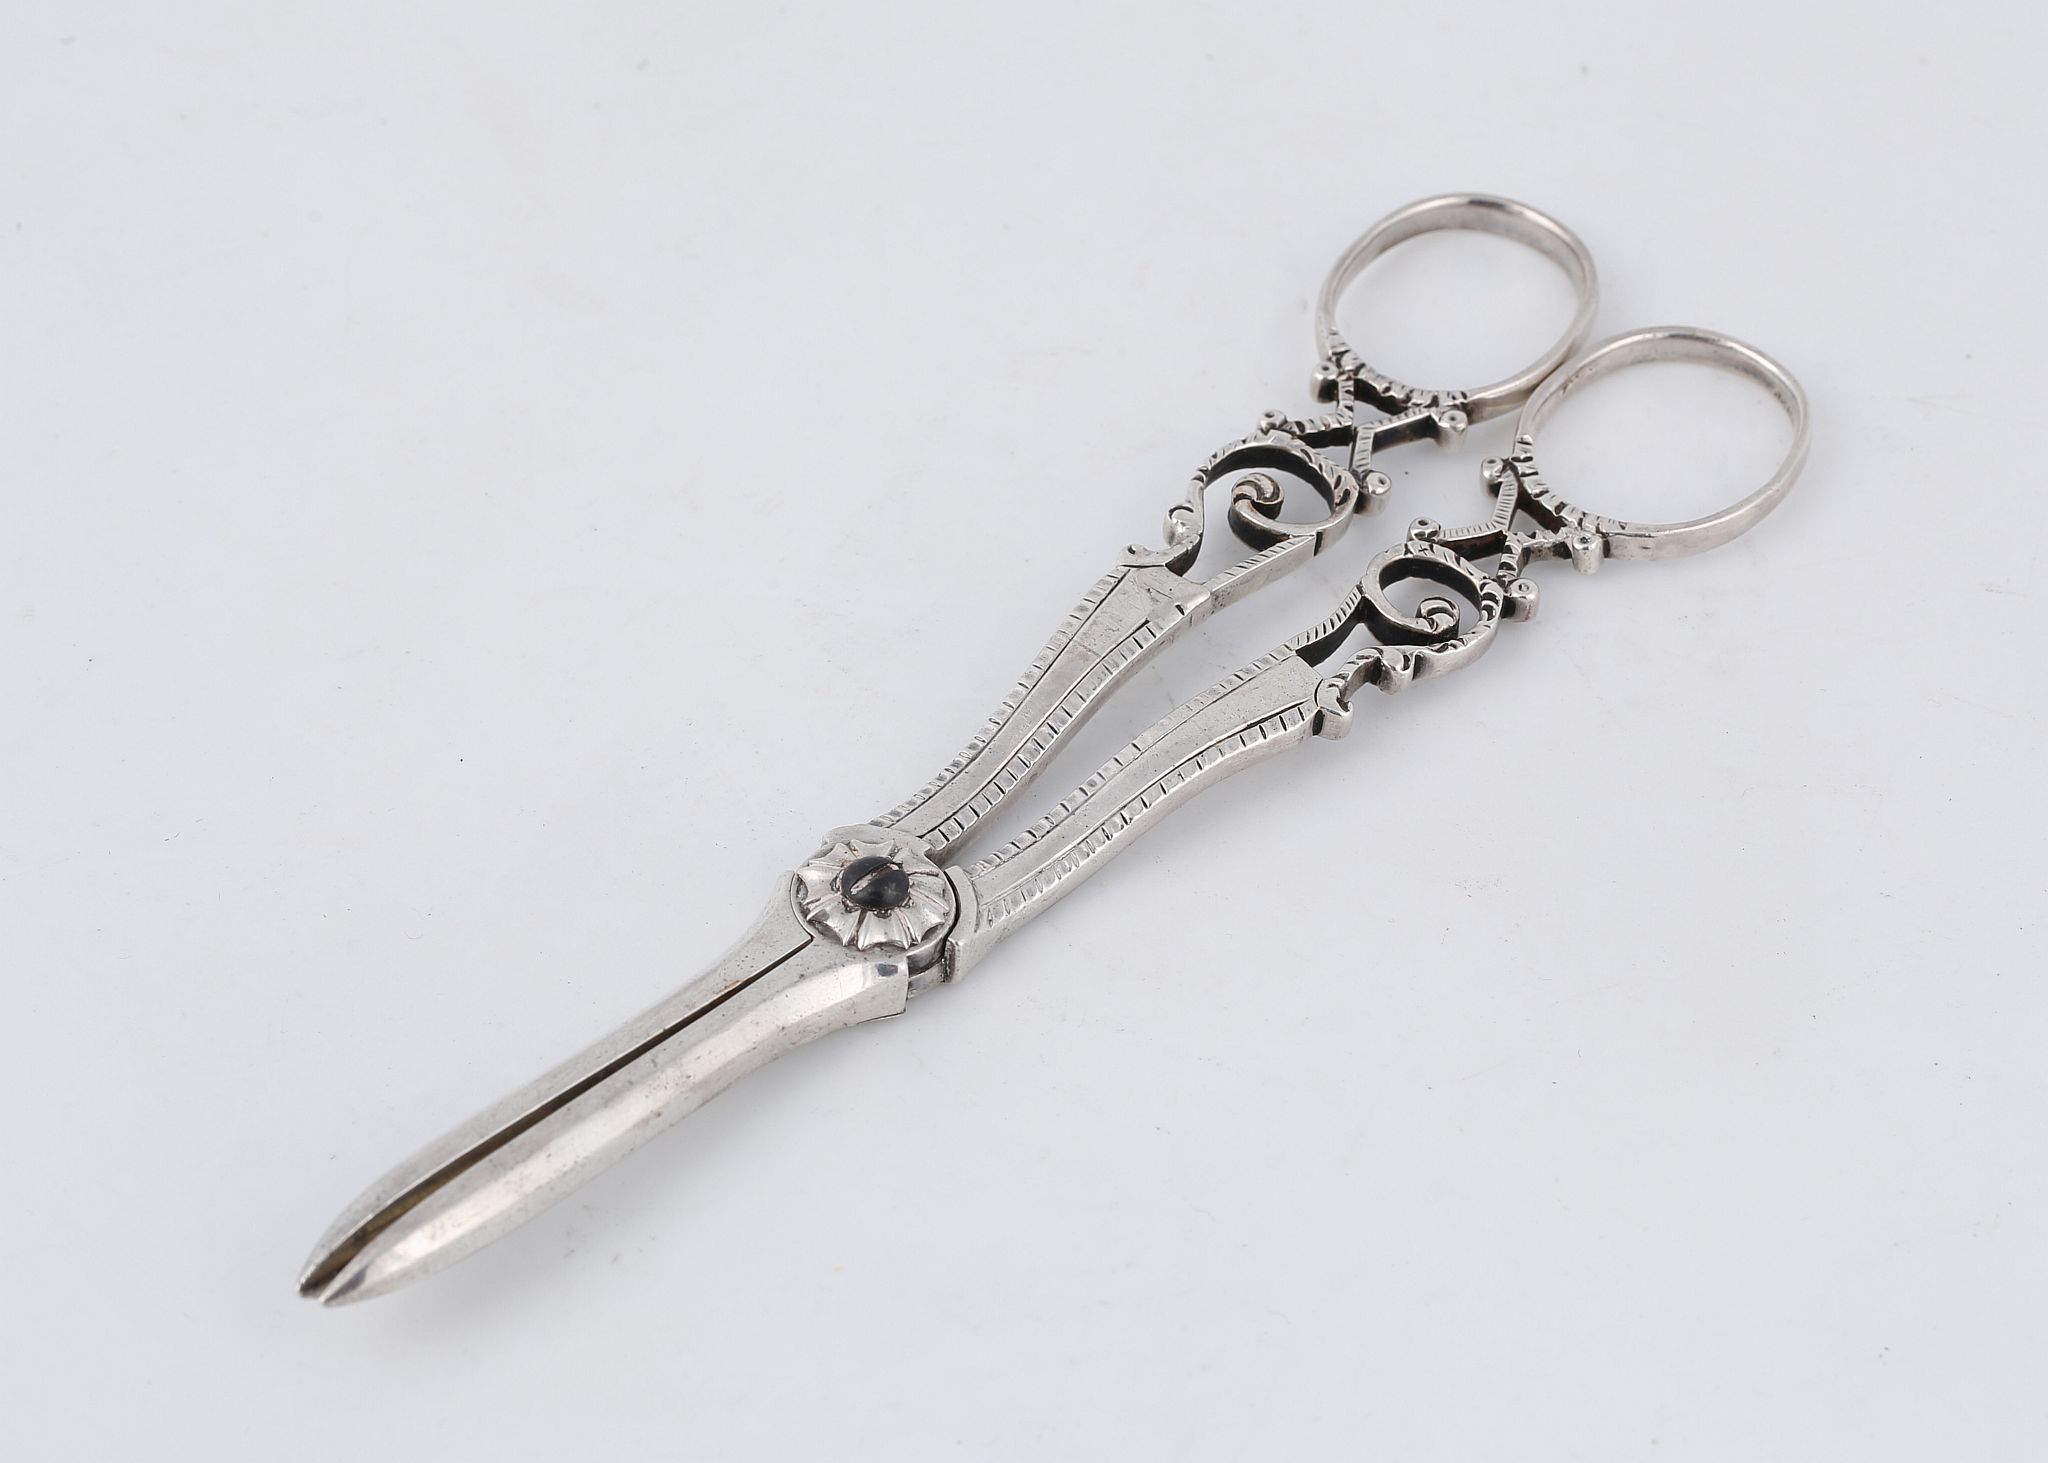 Antique Victorian Sterling Silver grape scissors by Aldwinckle & Slater, London 1884. With feathered